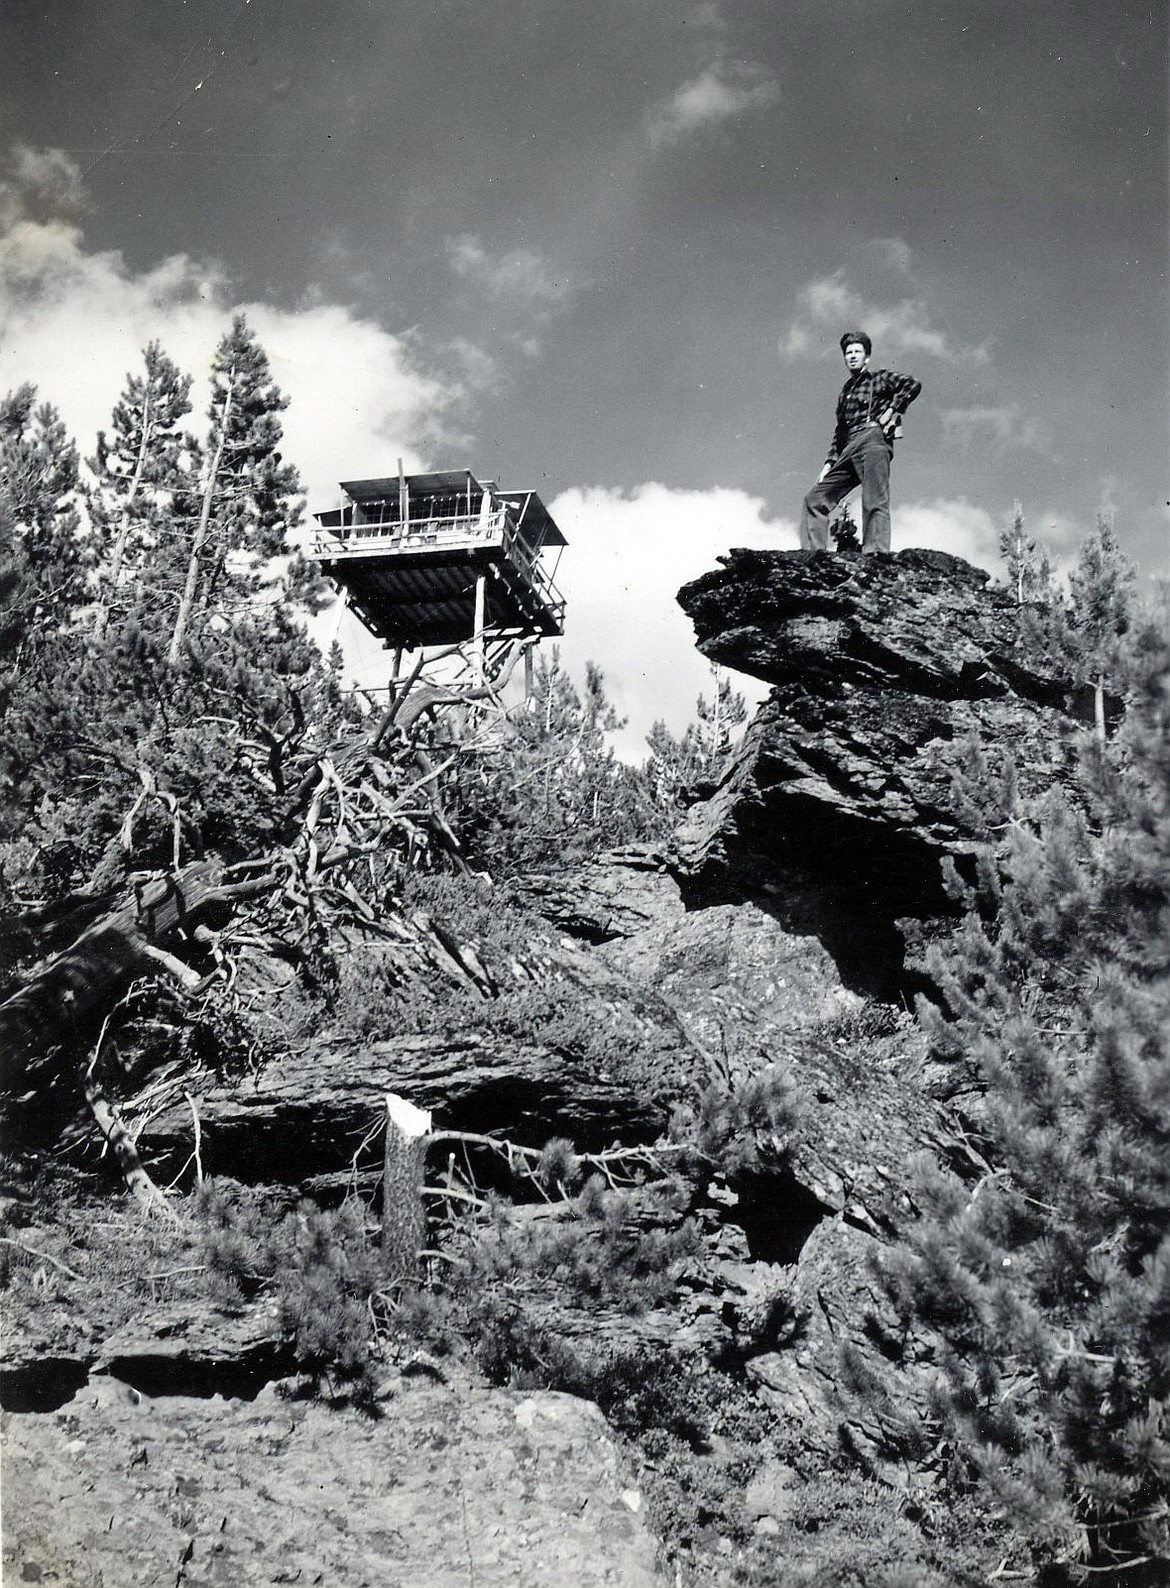 Al Williams stops for a quick photo just below the lookout on the ascent of Blacktail Mountain August 19, 1937. (A.E. Boorman photo)